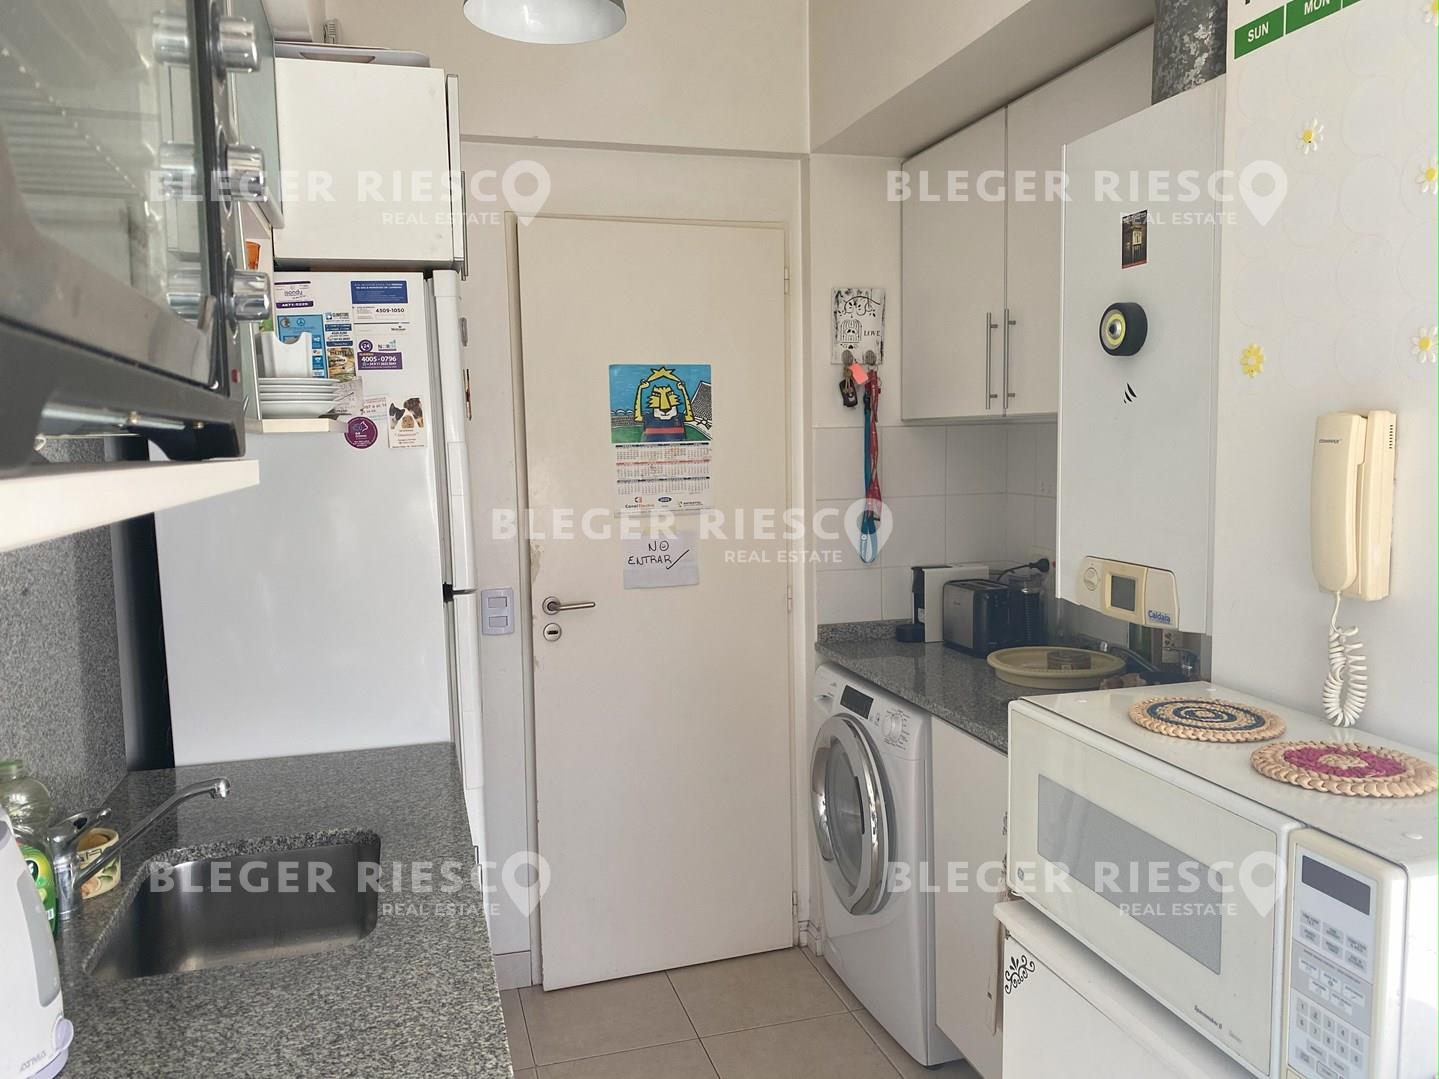 #4785080 | Temporary Rental | Apartment | Portezuelo (Bleger-Riesco Real State)